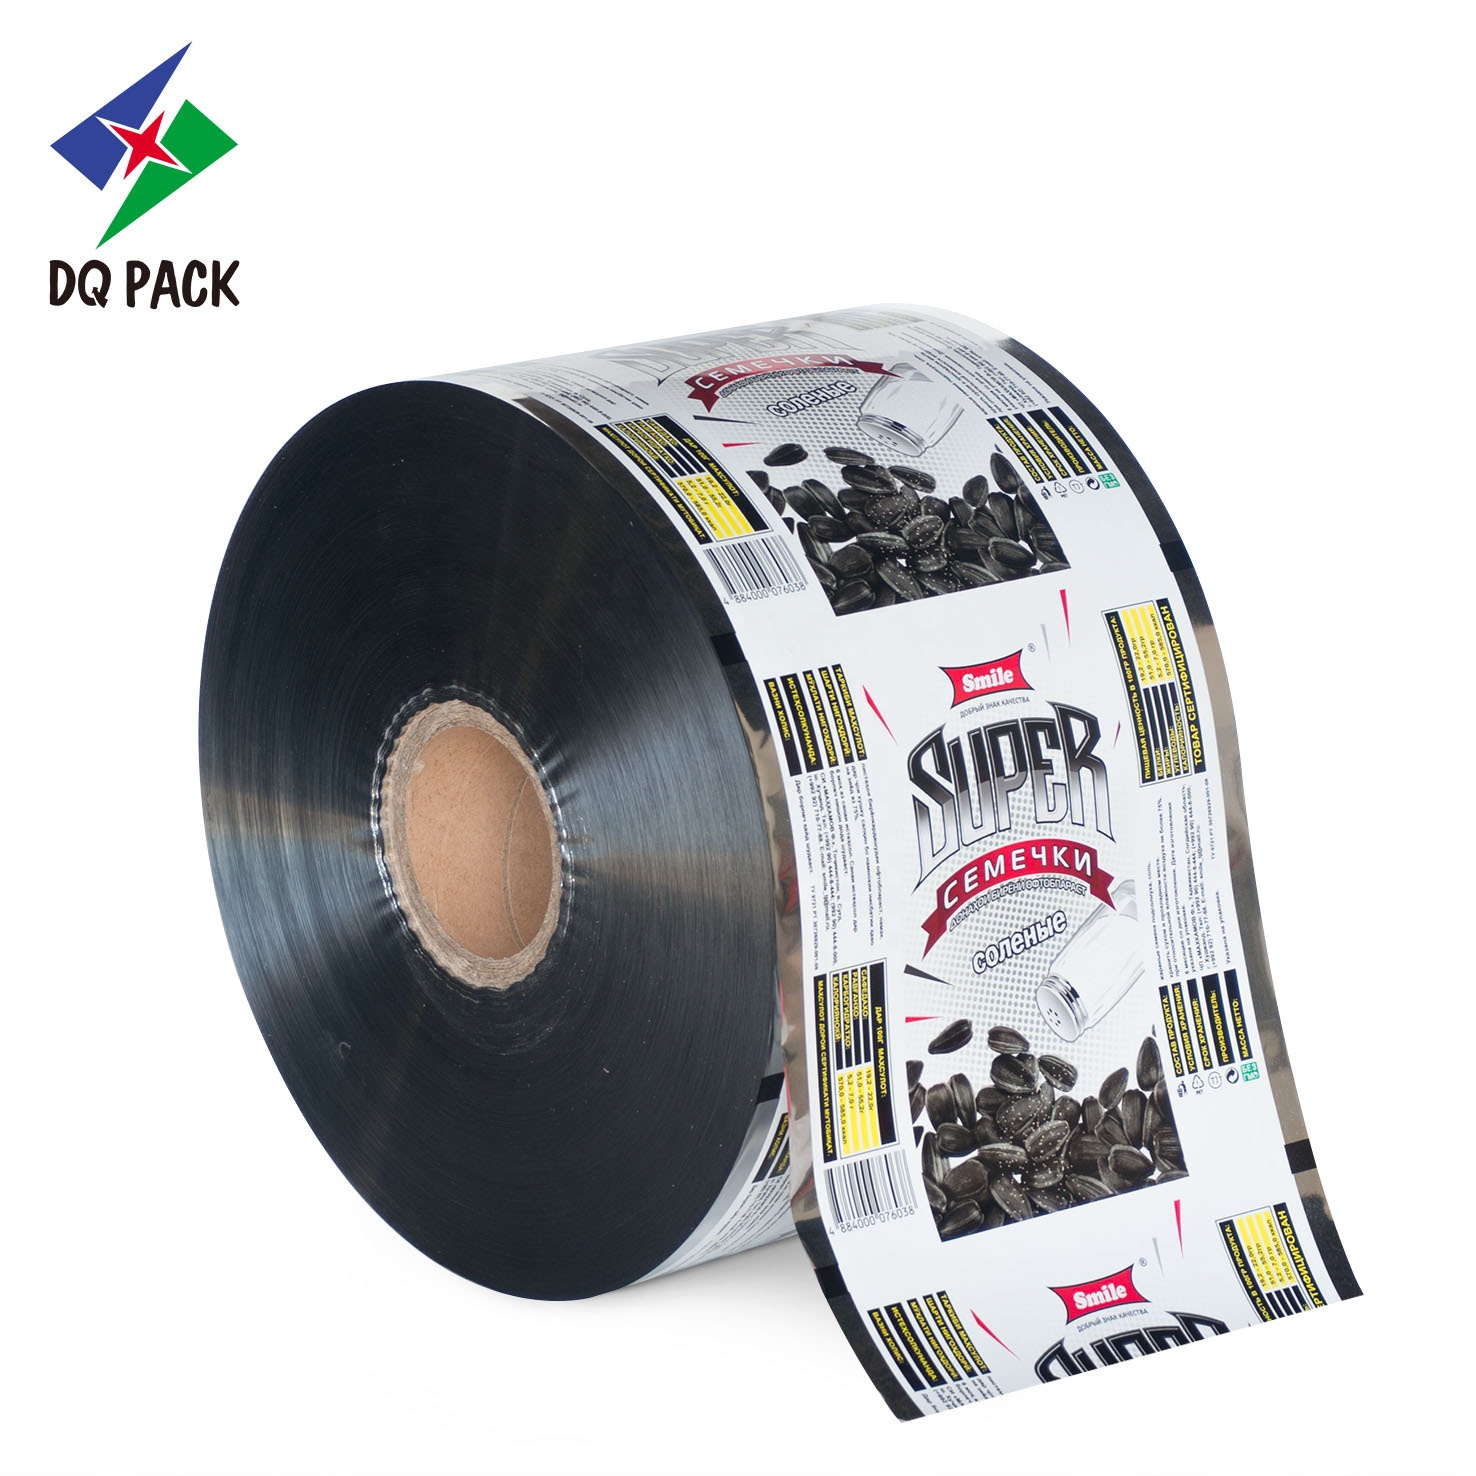 DQ PACK Colorful Printing Plastic Food Packaging Roll Film For Sunflower Seeds